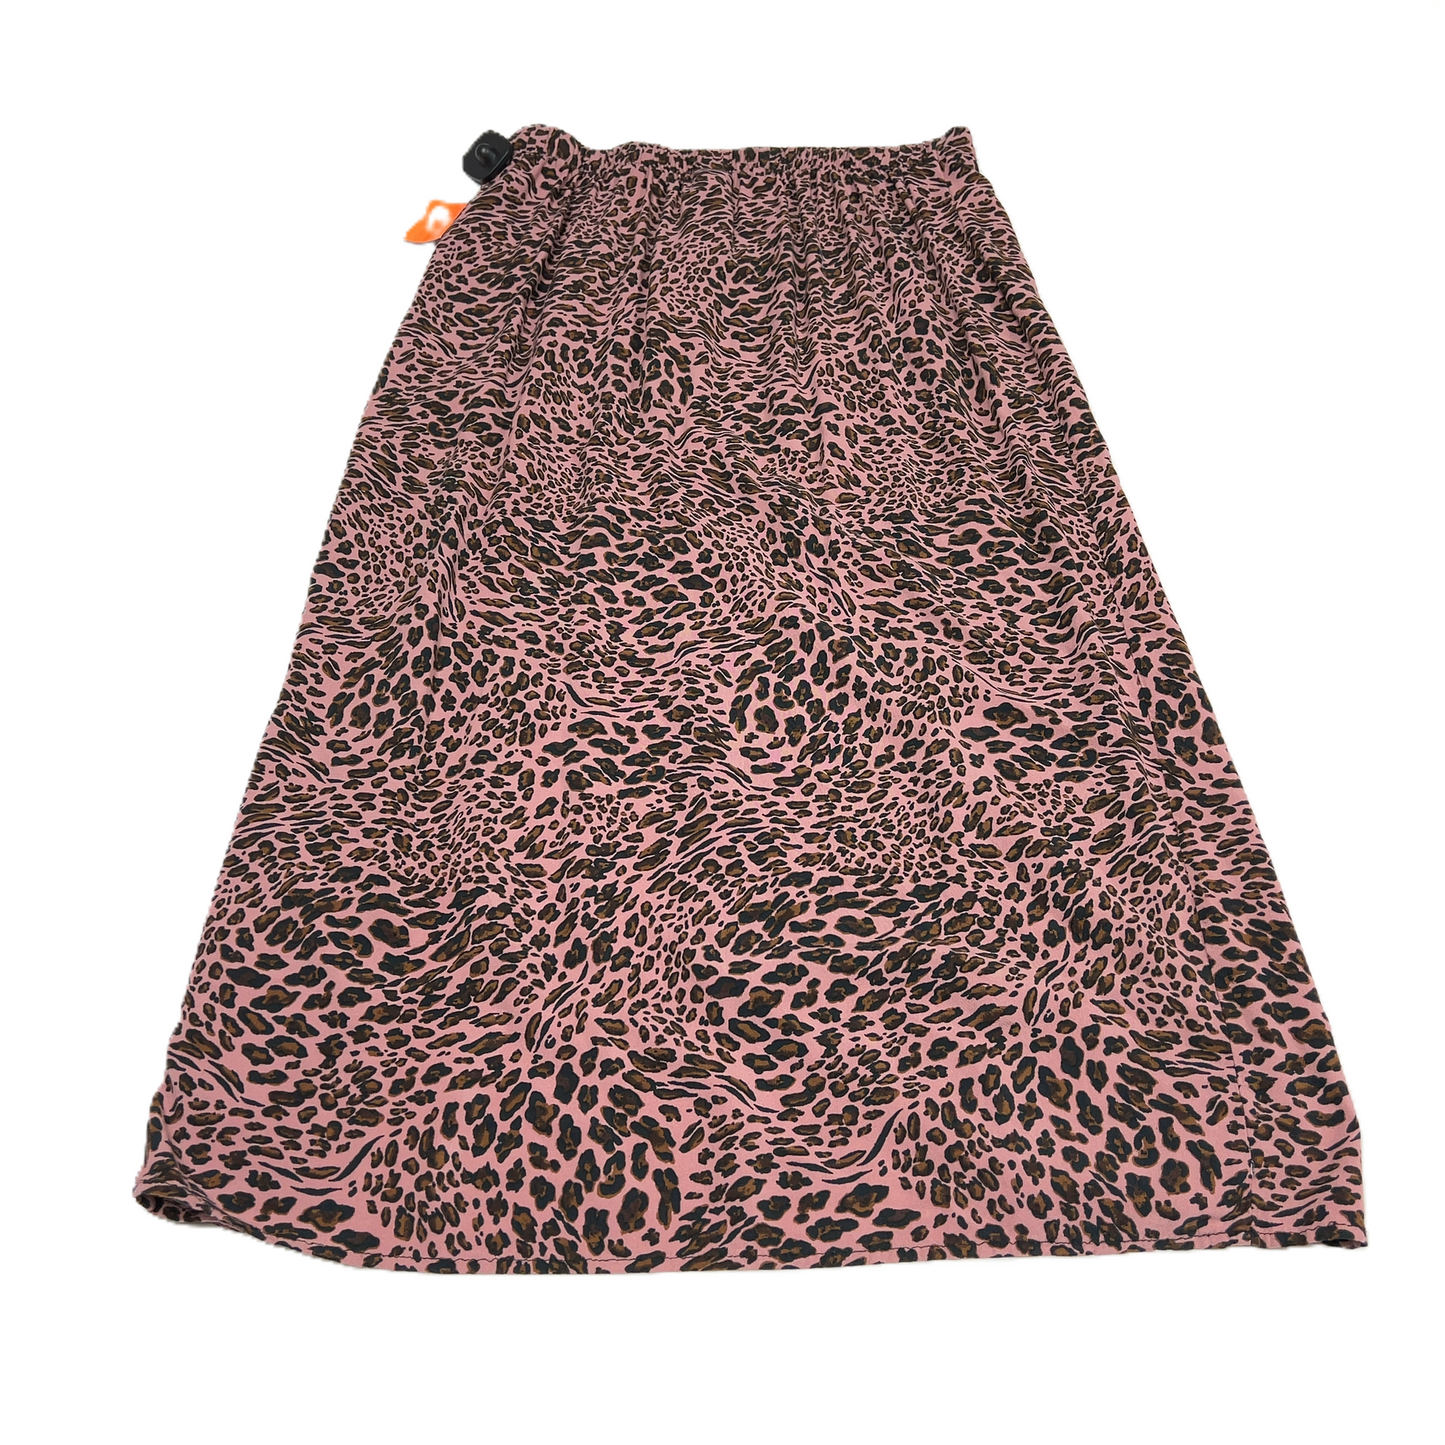 Skirt Midi By Wild Fable  Size: M